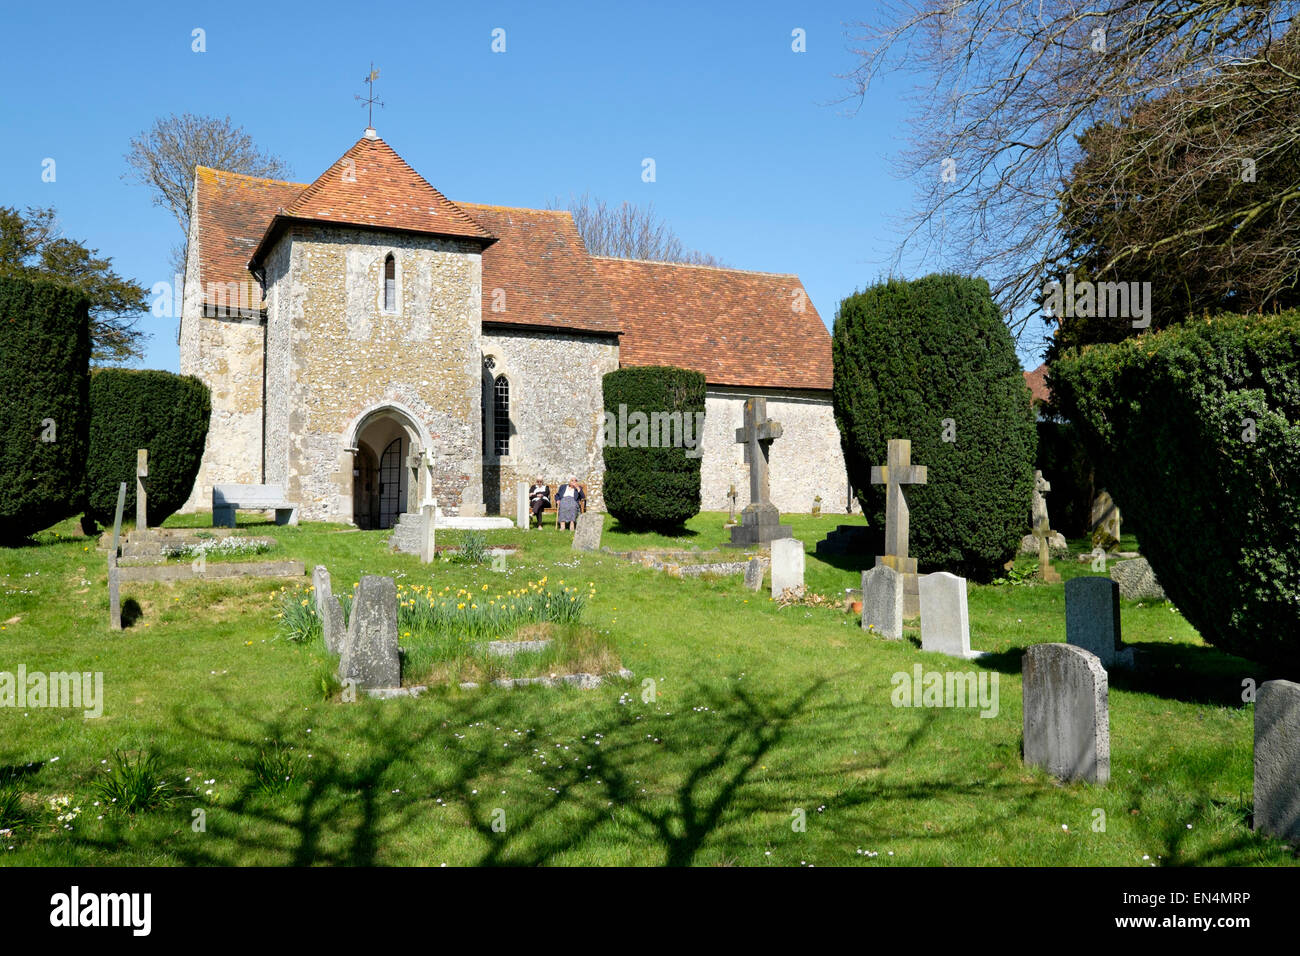 Two senior citizens sit outside the parish church of St Andrew's, West Stoke, West Sussex, England Stock Photo